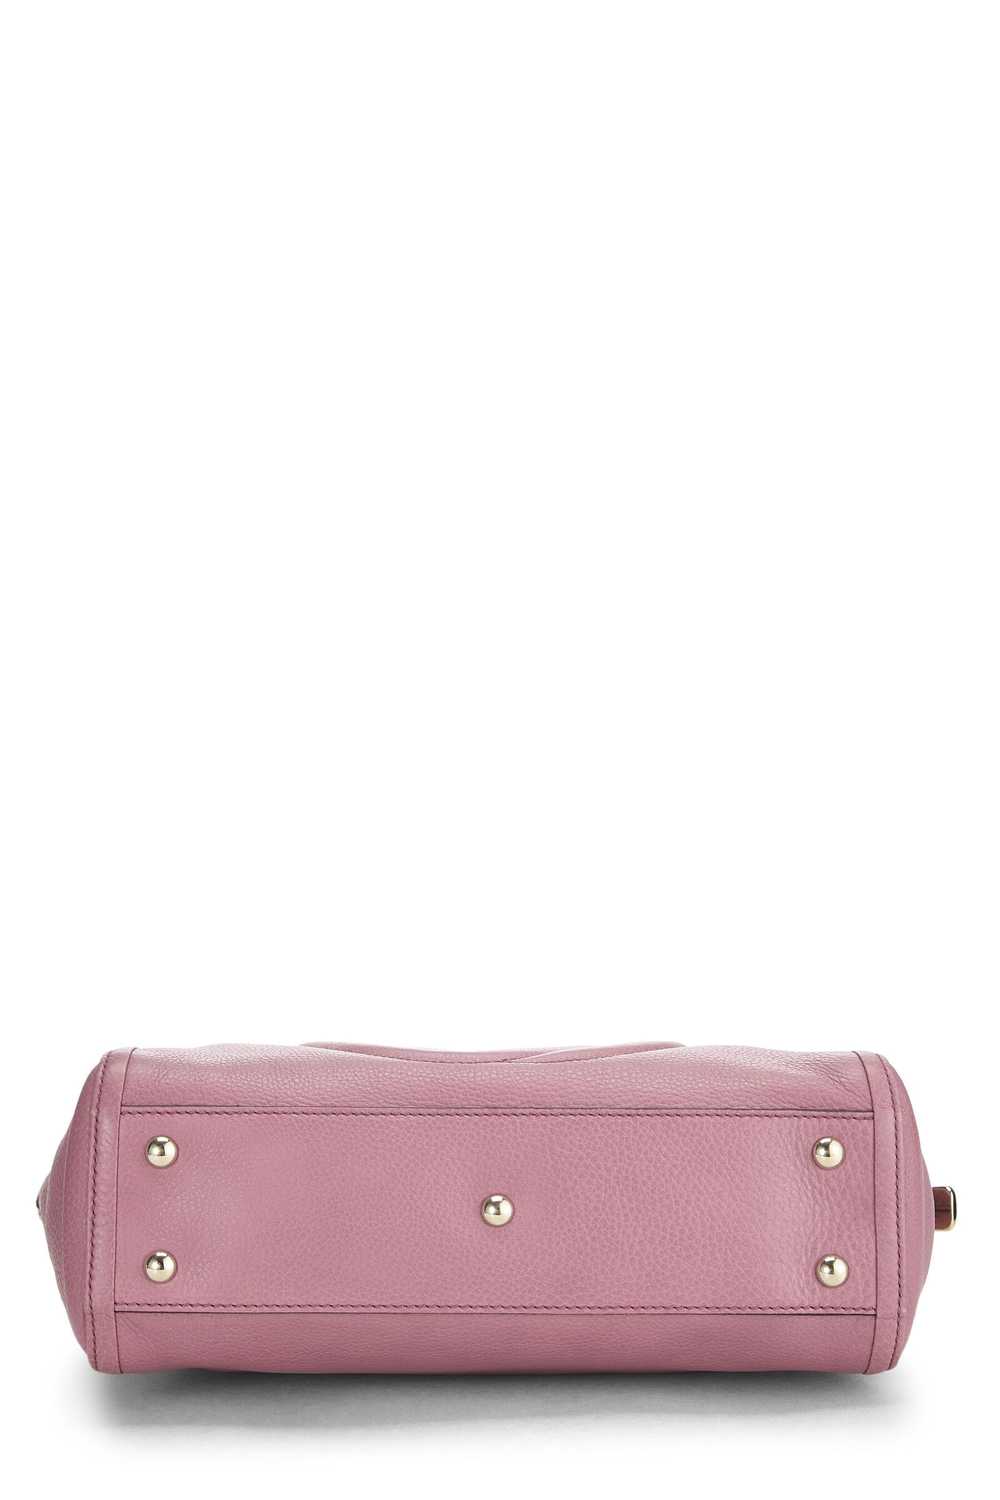 Pink Grained Leather Soho Zip Tote - image 5